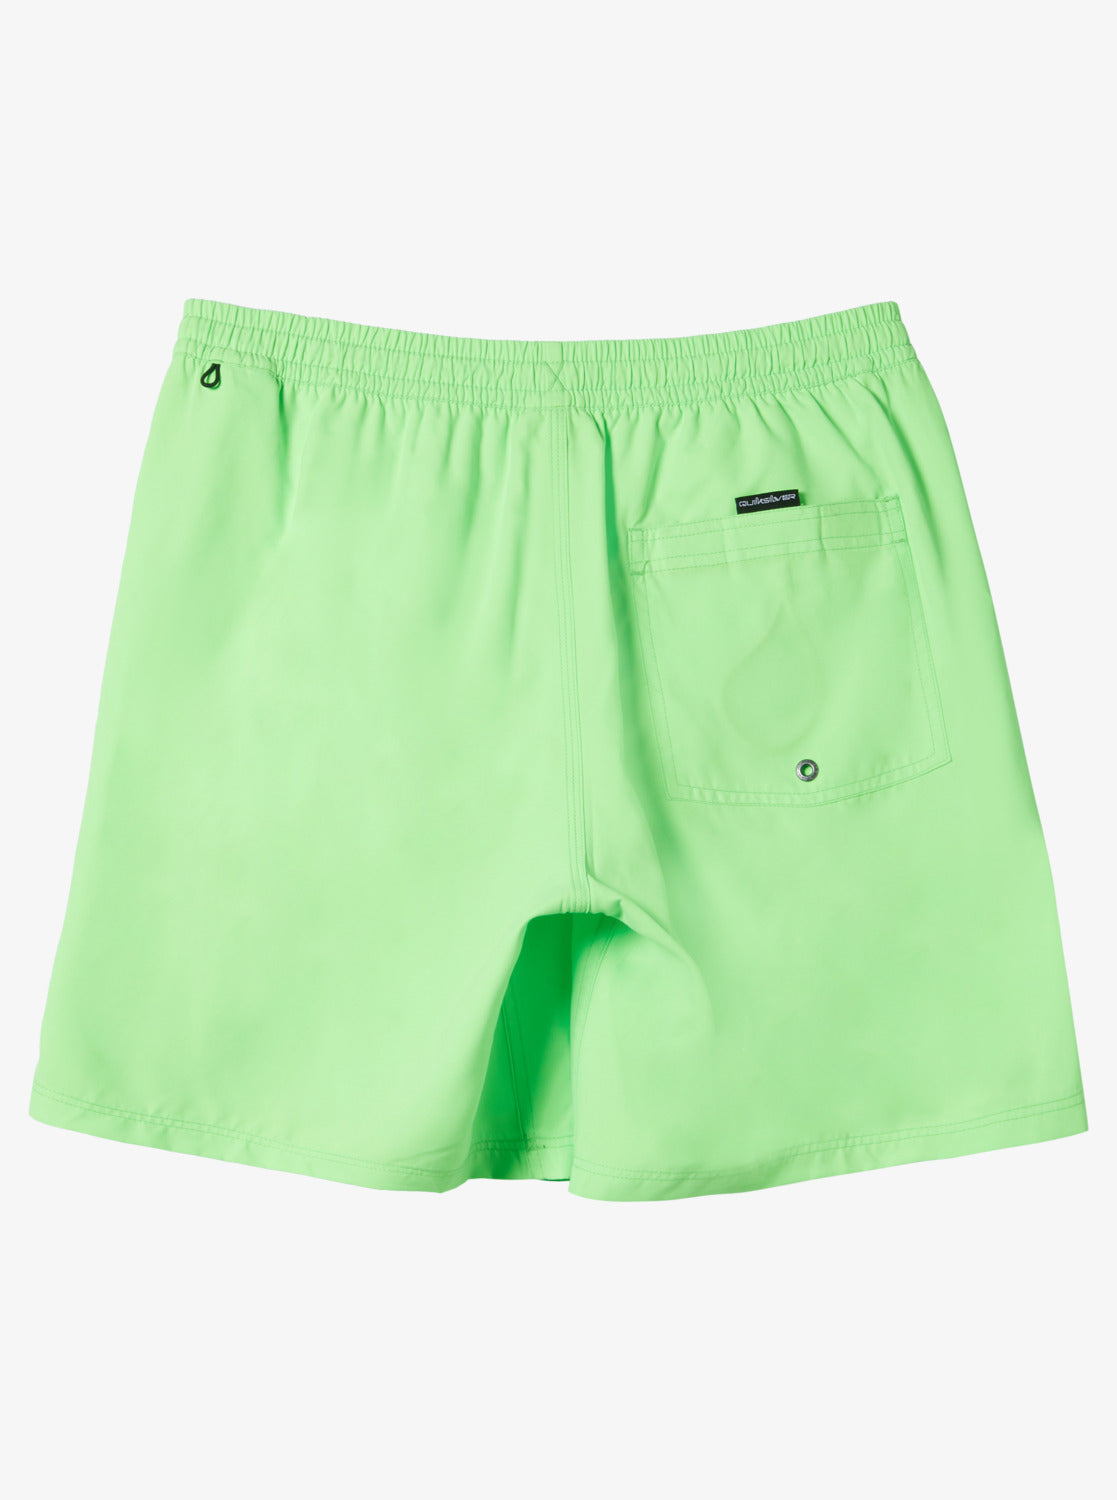 Quiksilver Everyday Solid Volley - Swim Shorts for Boys in Green